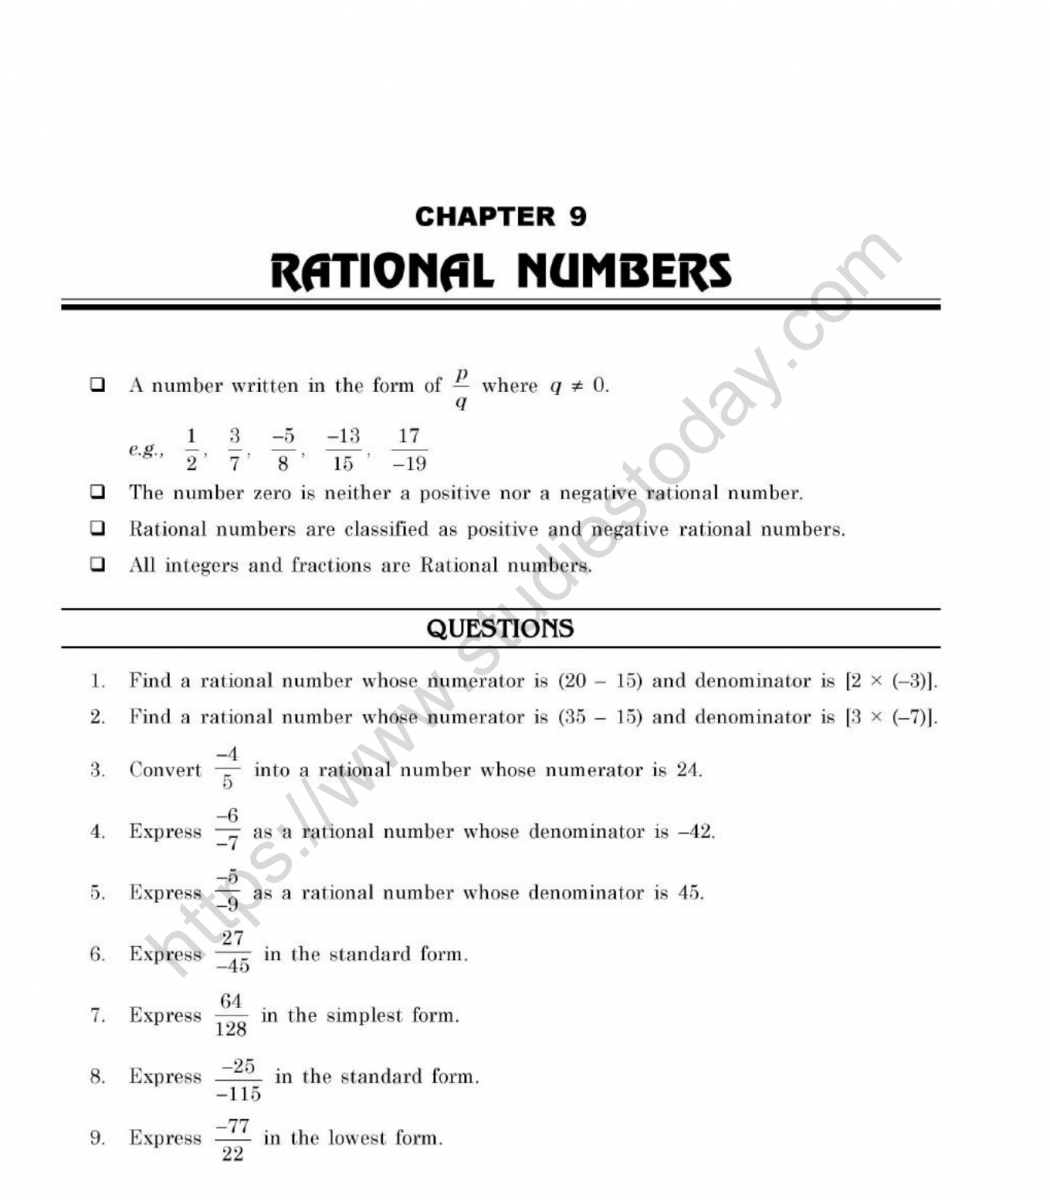 cbse-class-7-maths-rational-numbers-worksheets